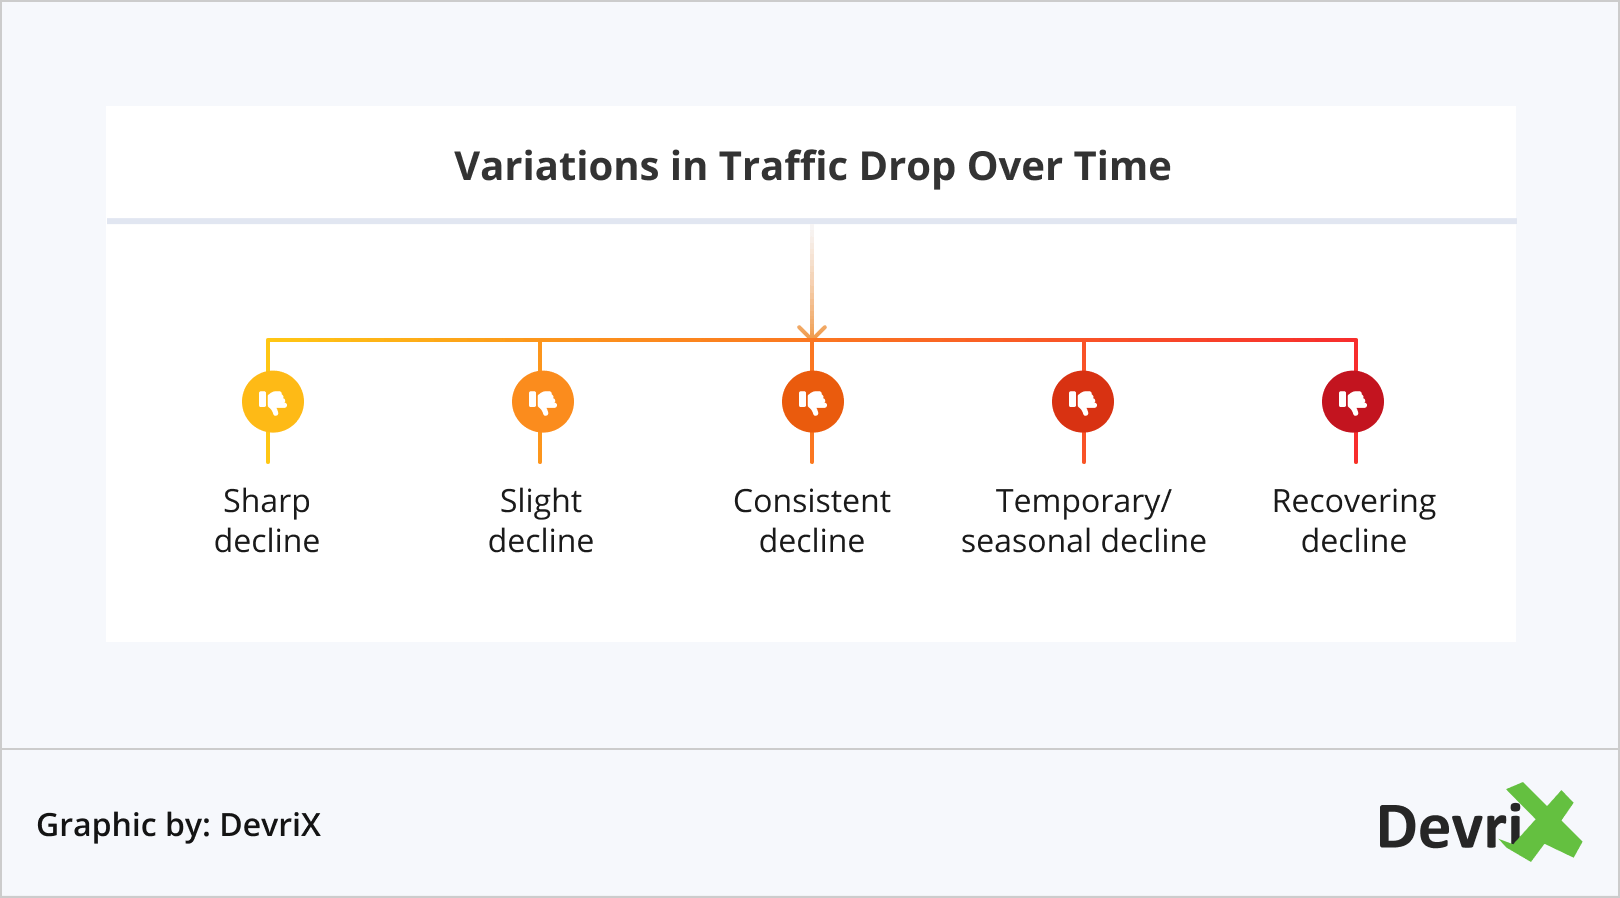 Variations in Traffic Drop Over Time